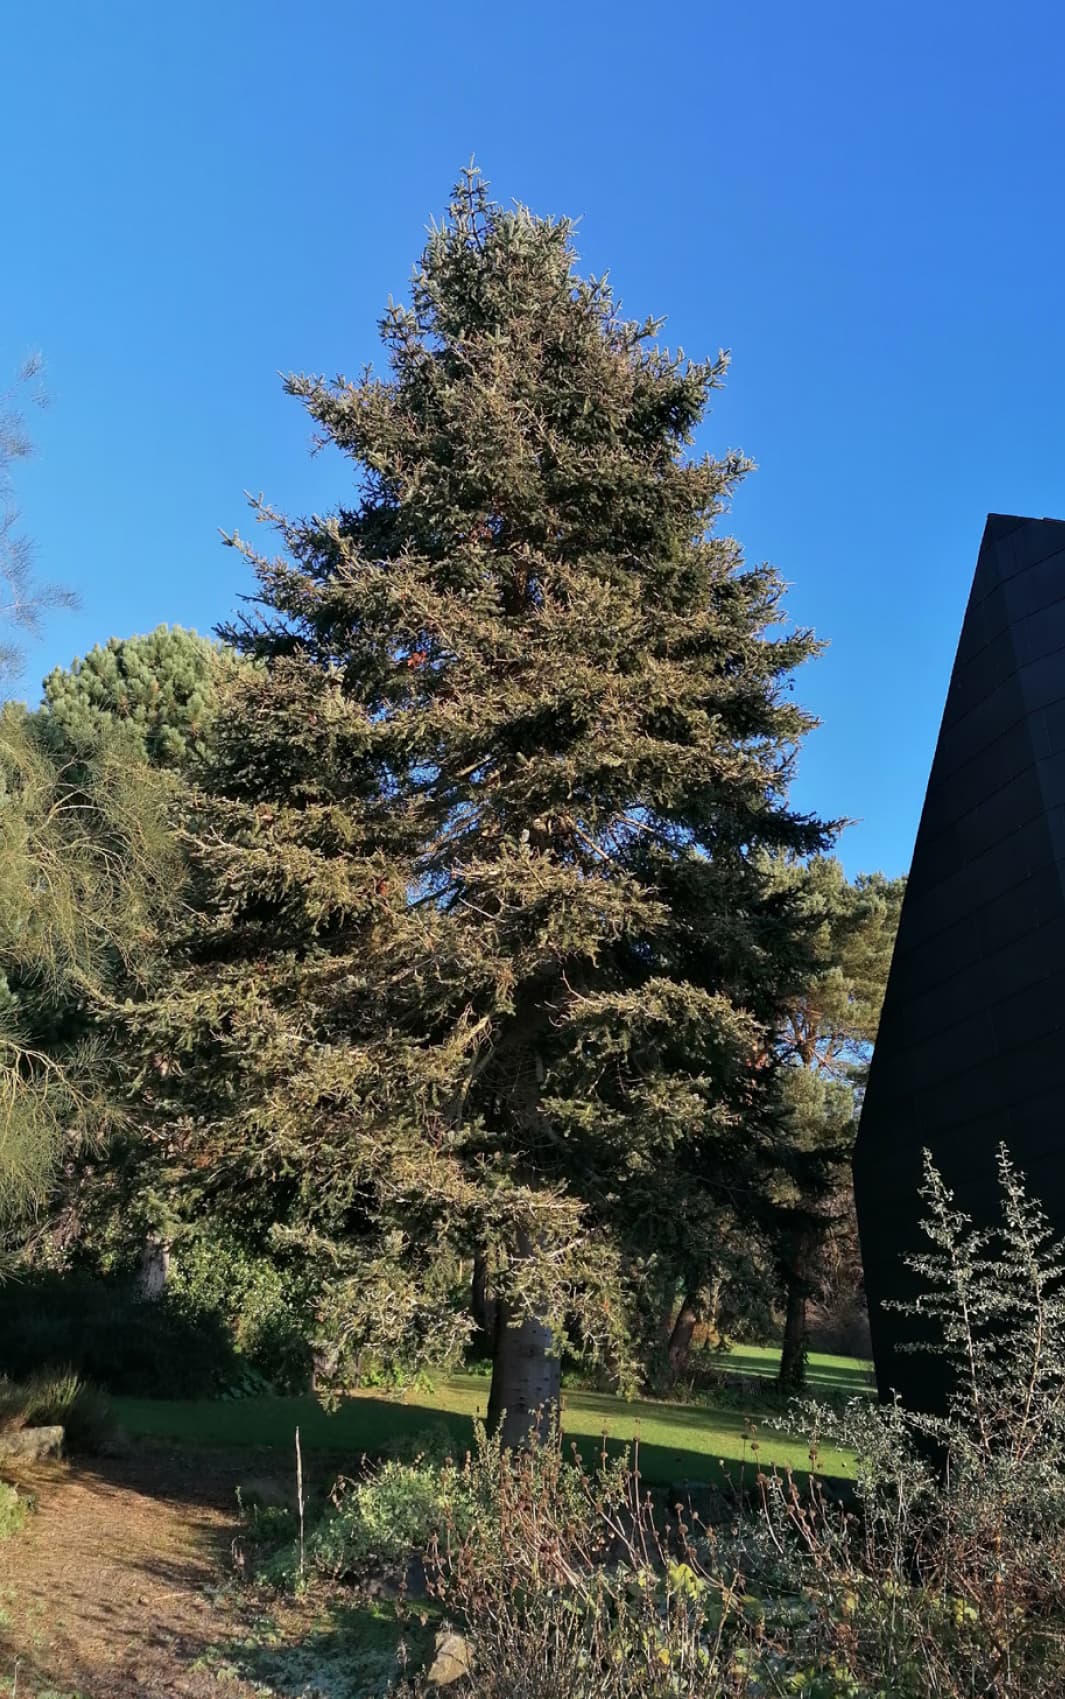 Abies cilicica, also known as Cilician fir or Taurus fir. This is a Mediterranean species with glaucous (blue) foliage, found growing in Lebanon, Syria and Turkey today. This one can be found in Dundee’s Botanic Garden. (Kevin Frediani)